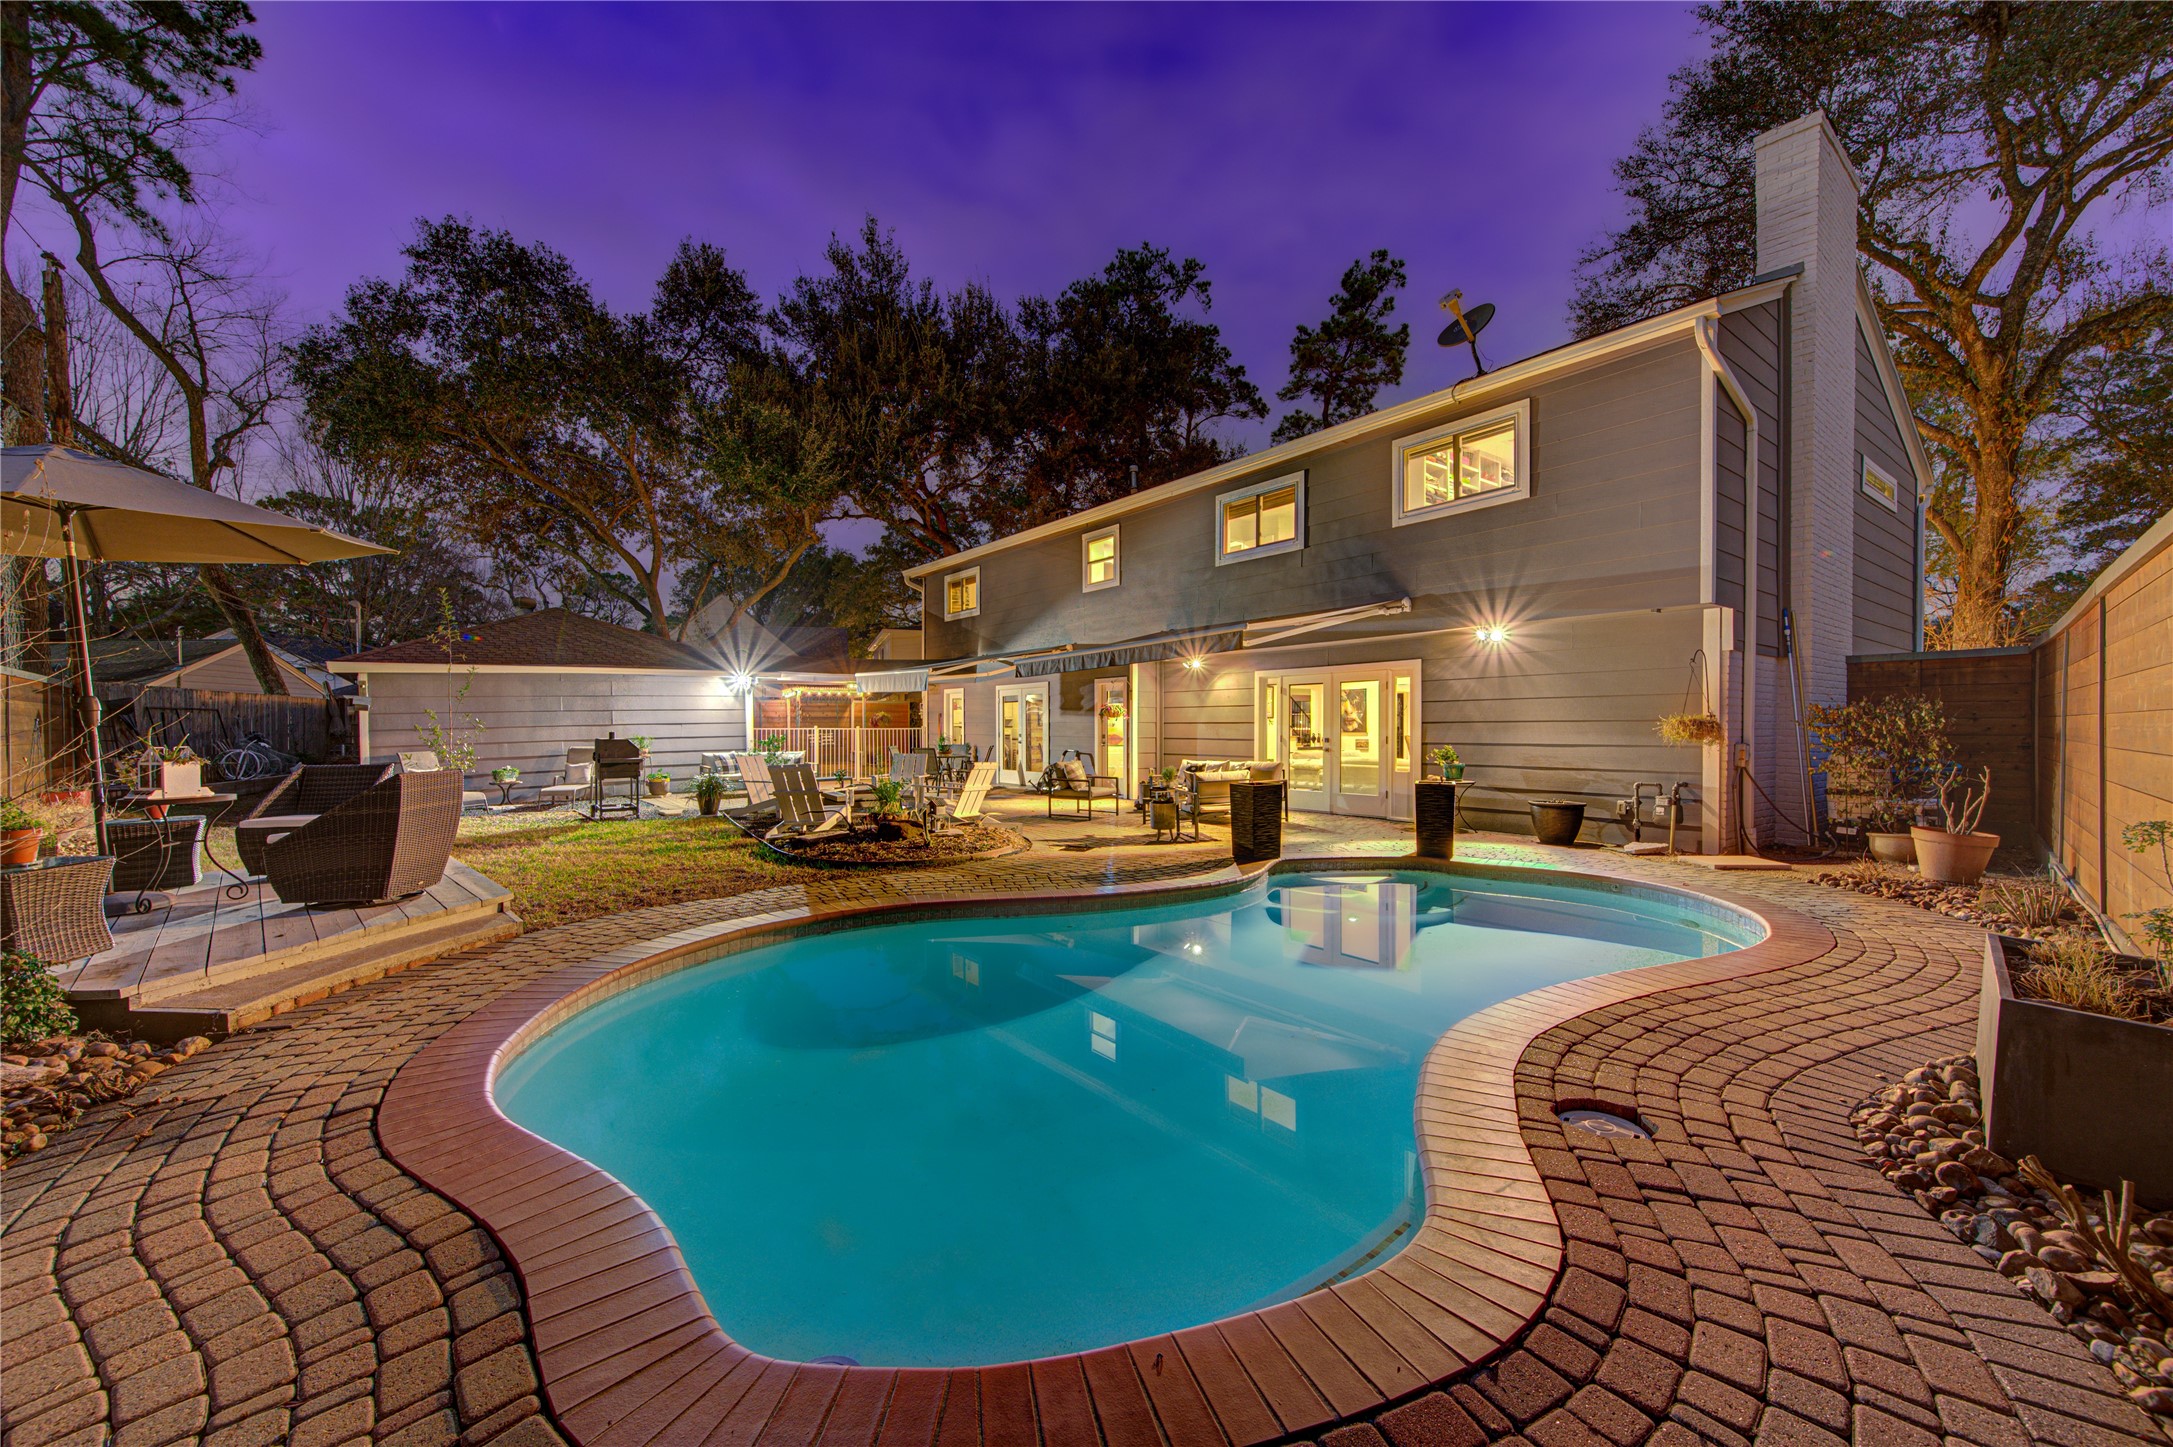 Dusk view of the backyard highlighting the sparking pool with brick pavers. So much space to play and entertain outdoors.